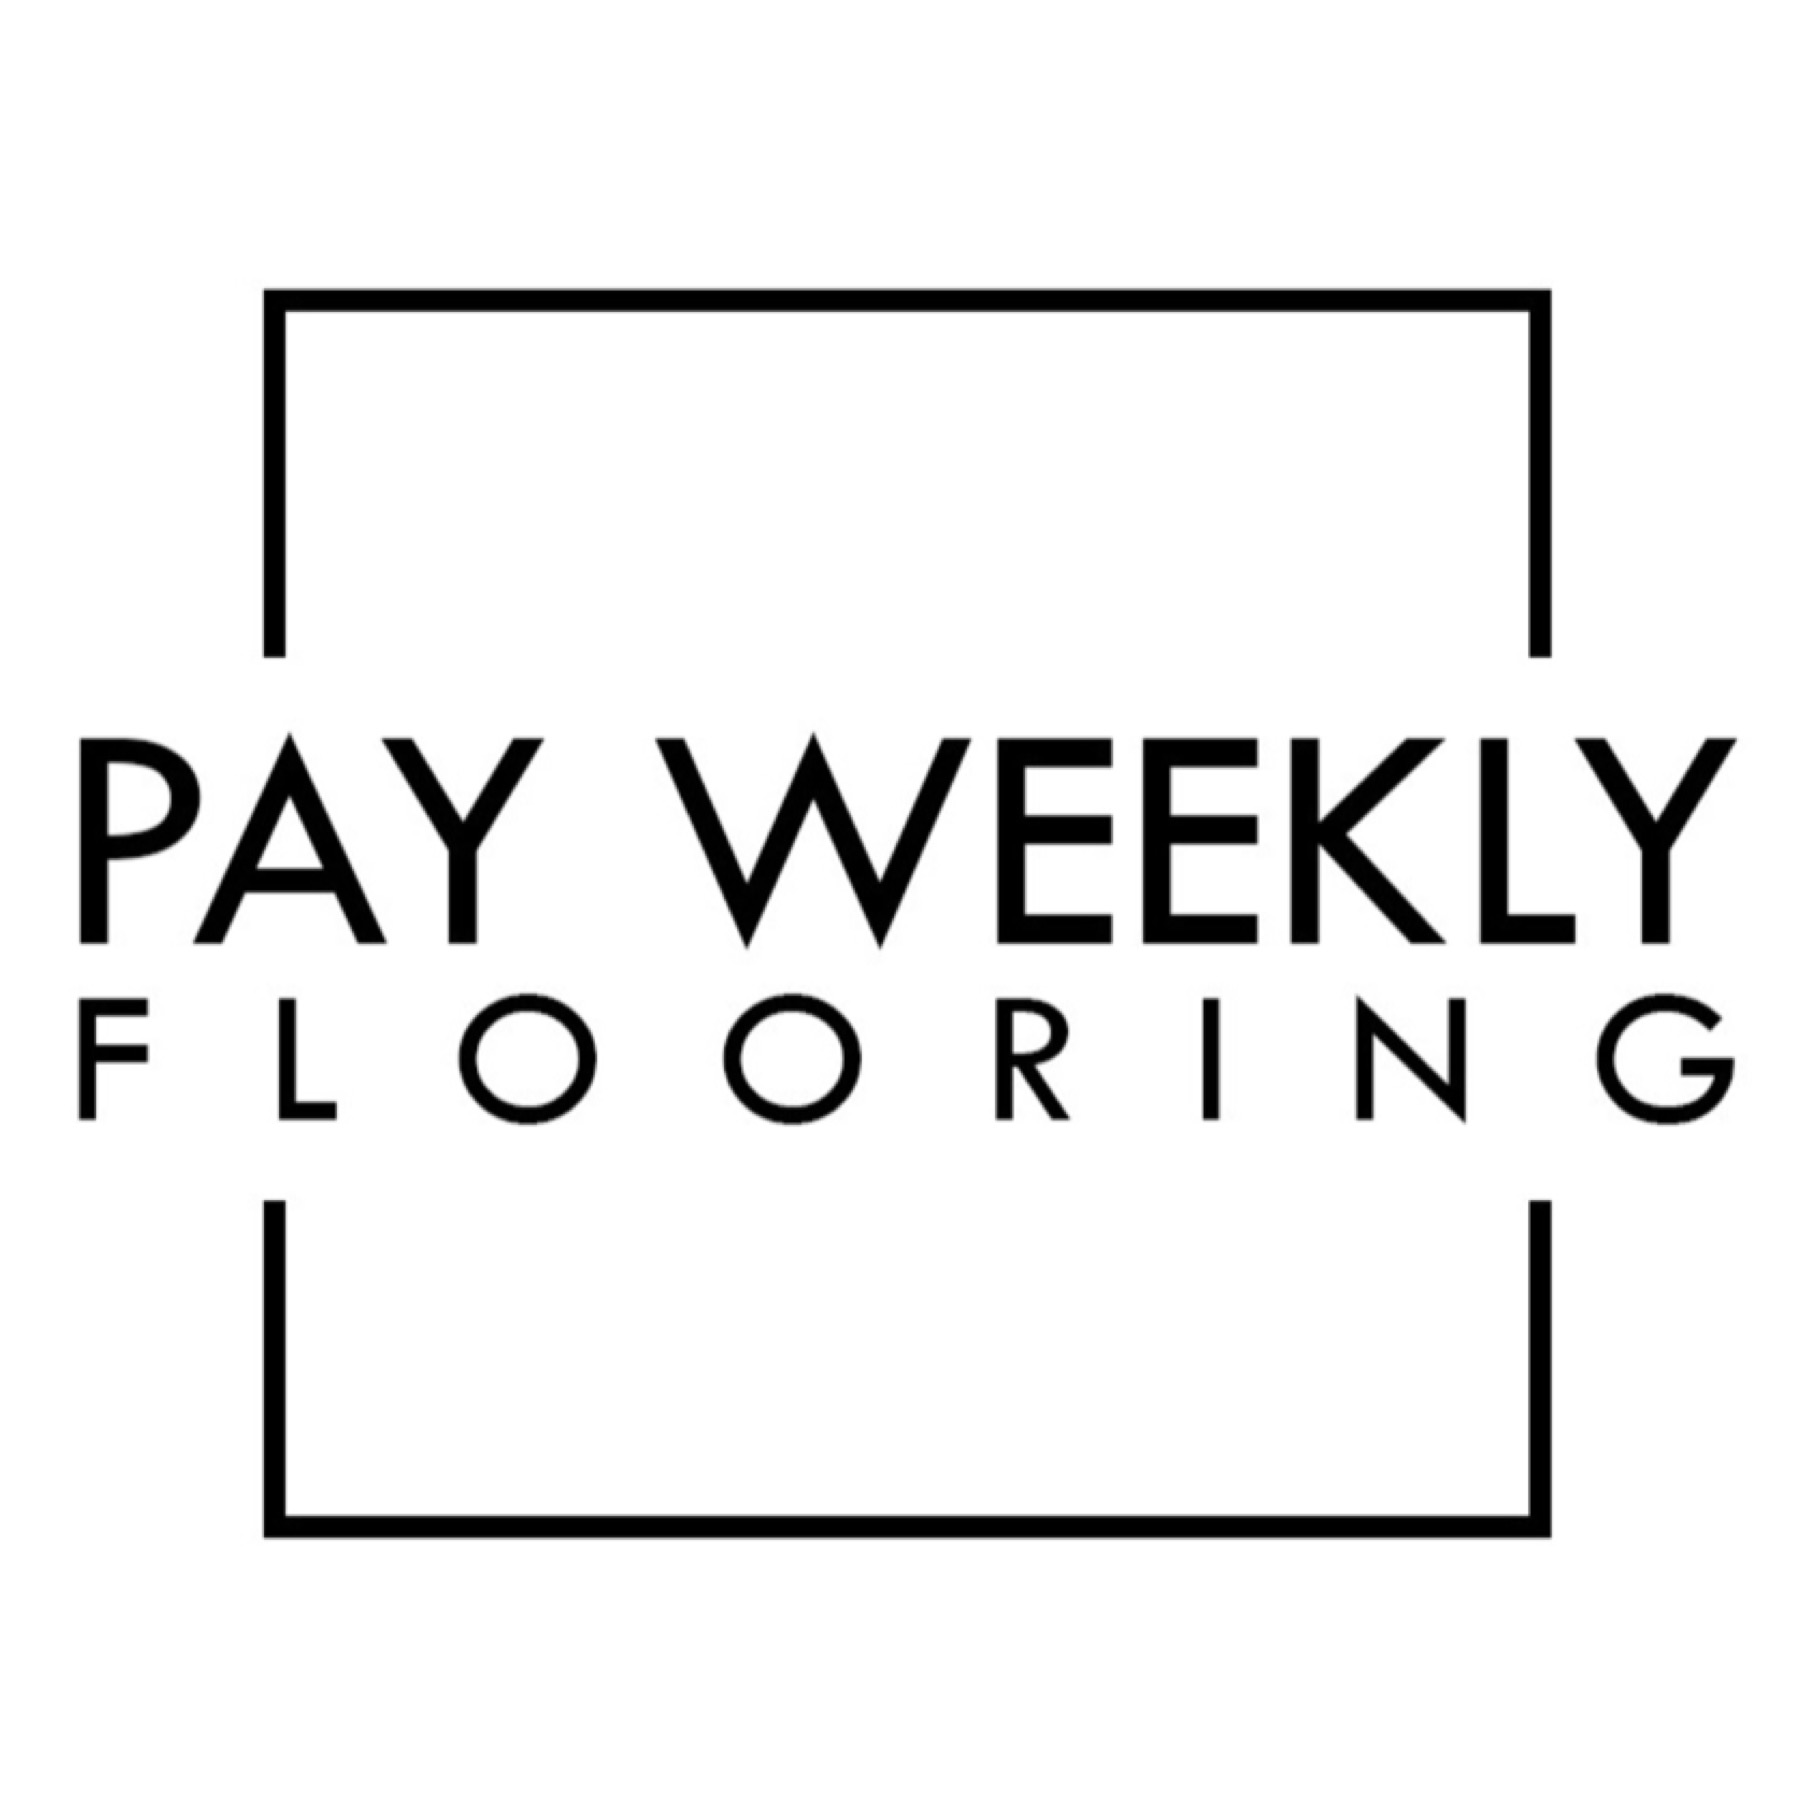 Pay Day Flooring